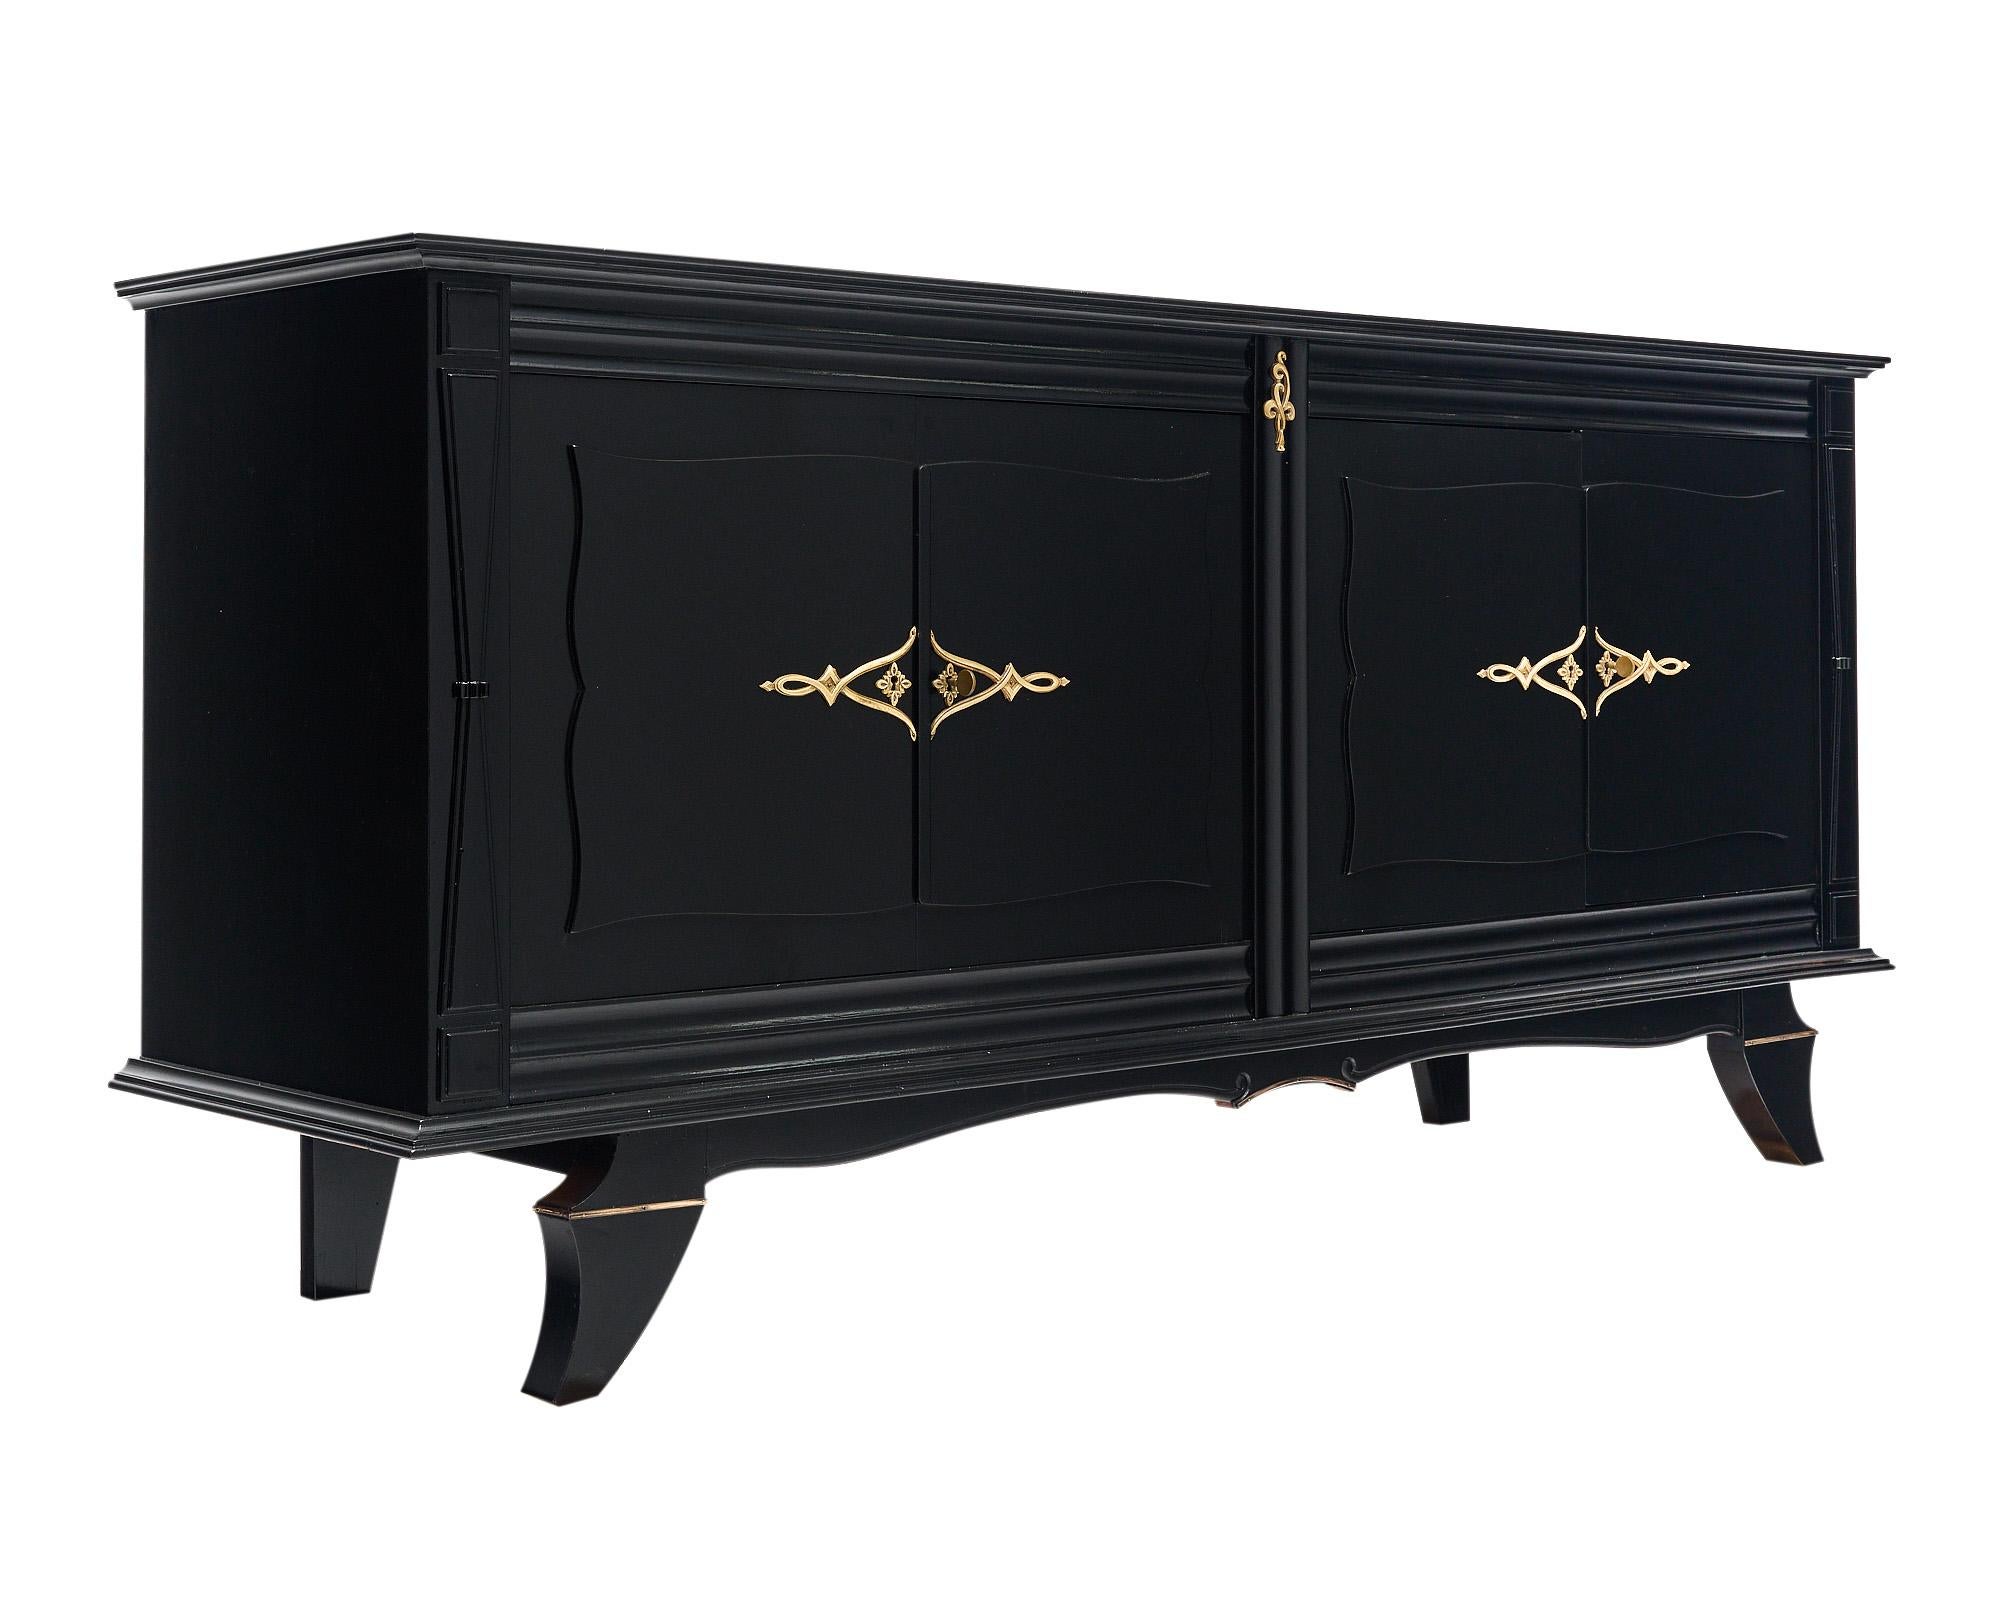 Buffet from the Art Deco period in France. This piece has been finished in an ebonized French polish providing a Museum quality luster. There are two set of doors that open outward to reveal interior shelving and a single dovetailed drawer. The